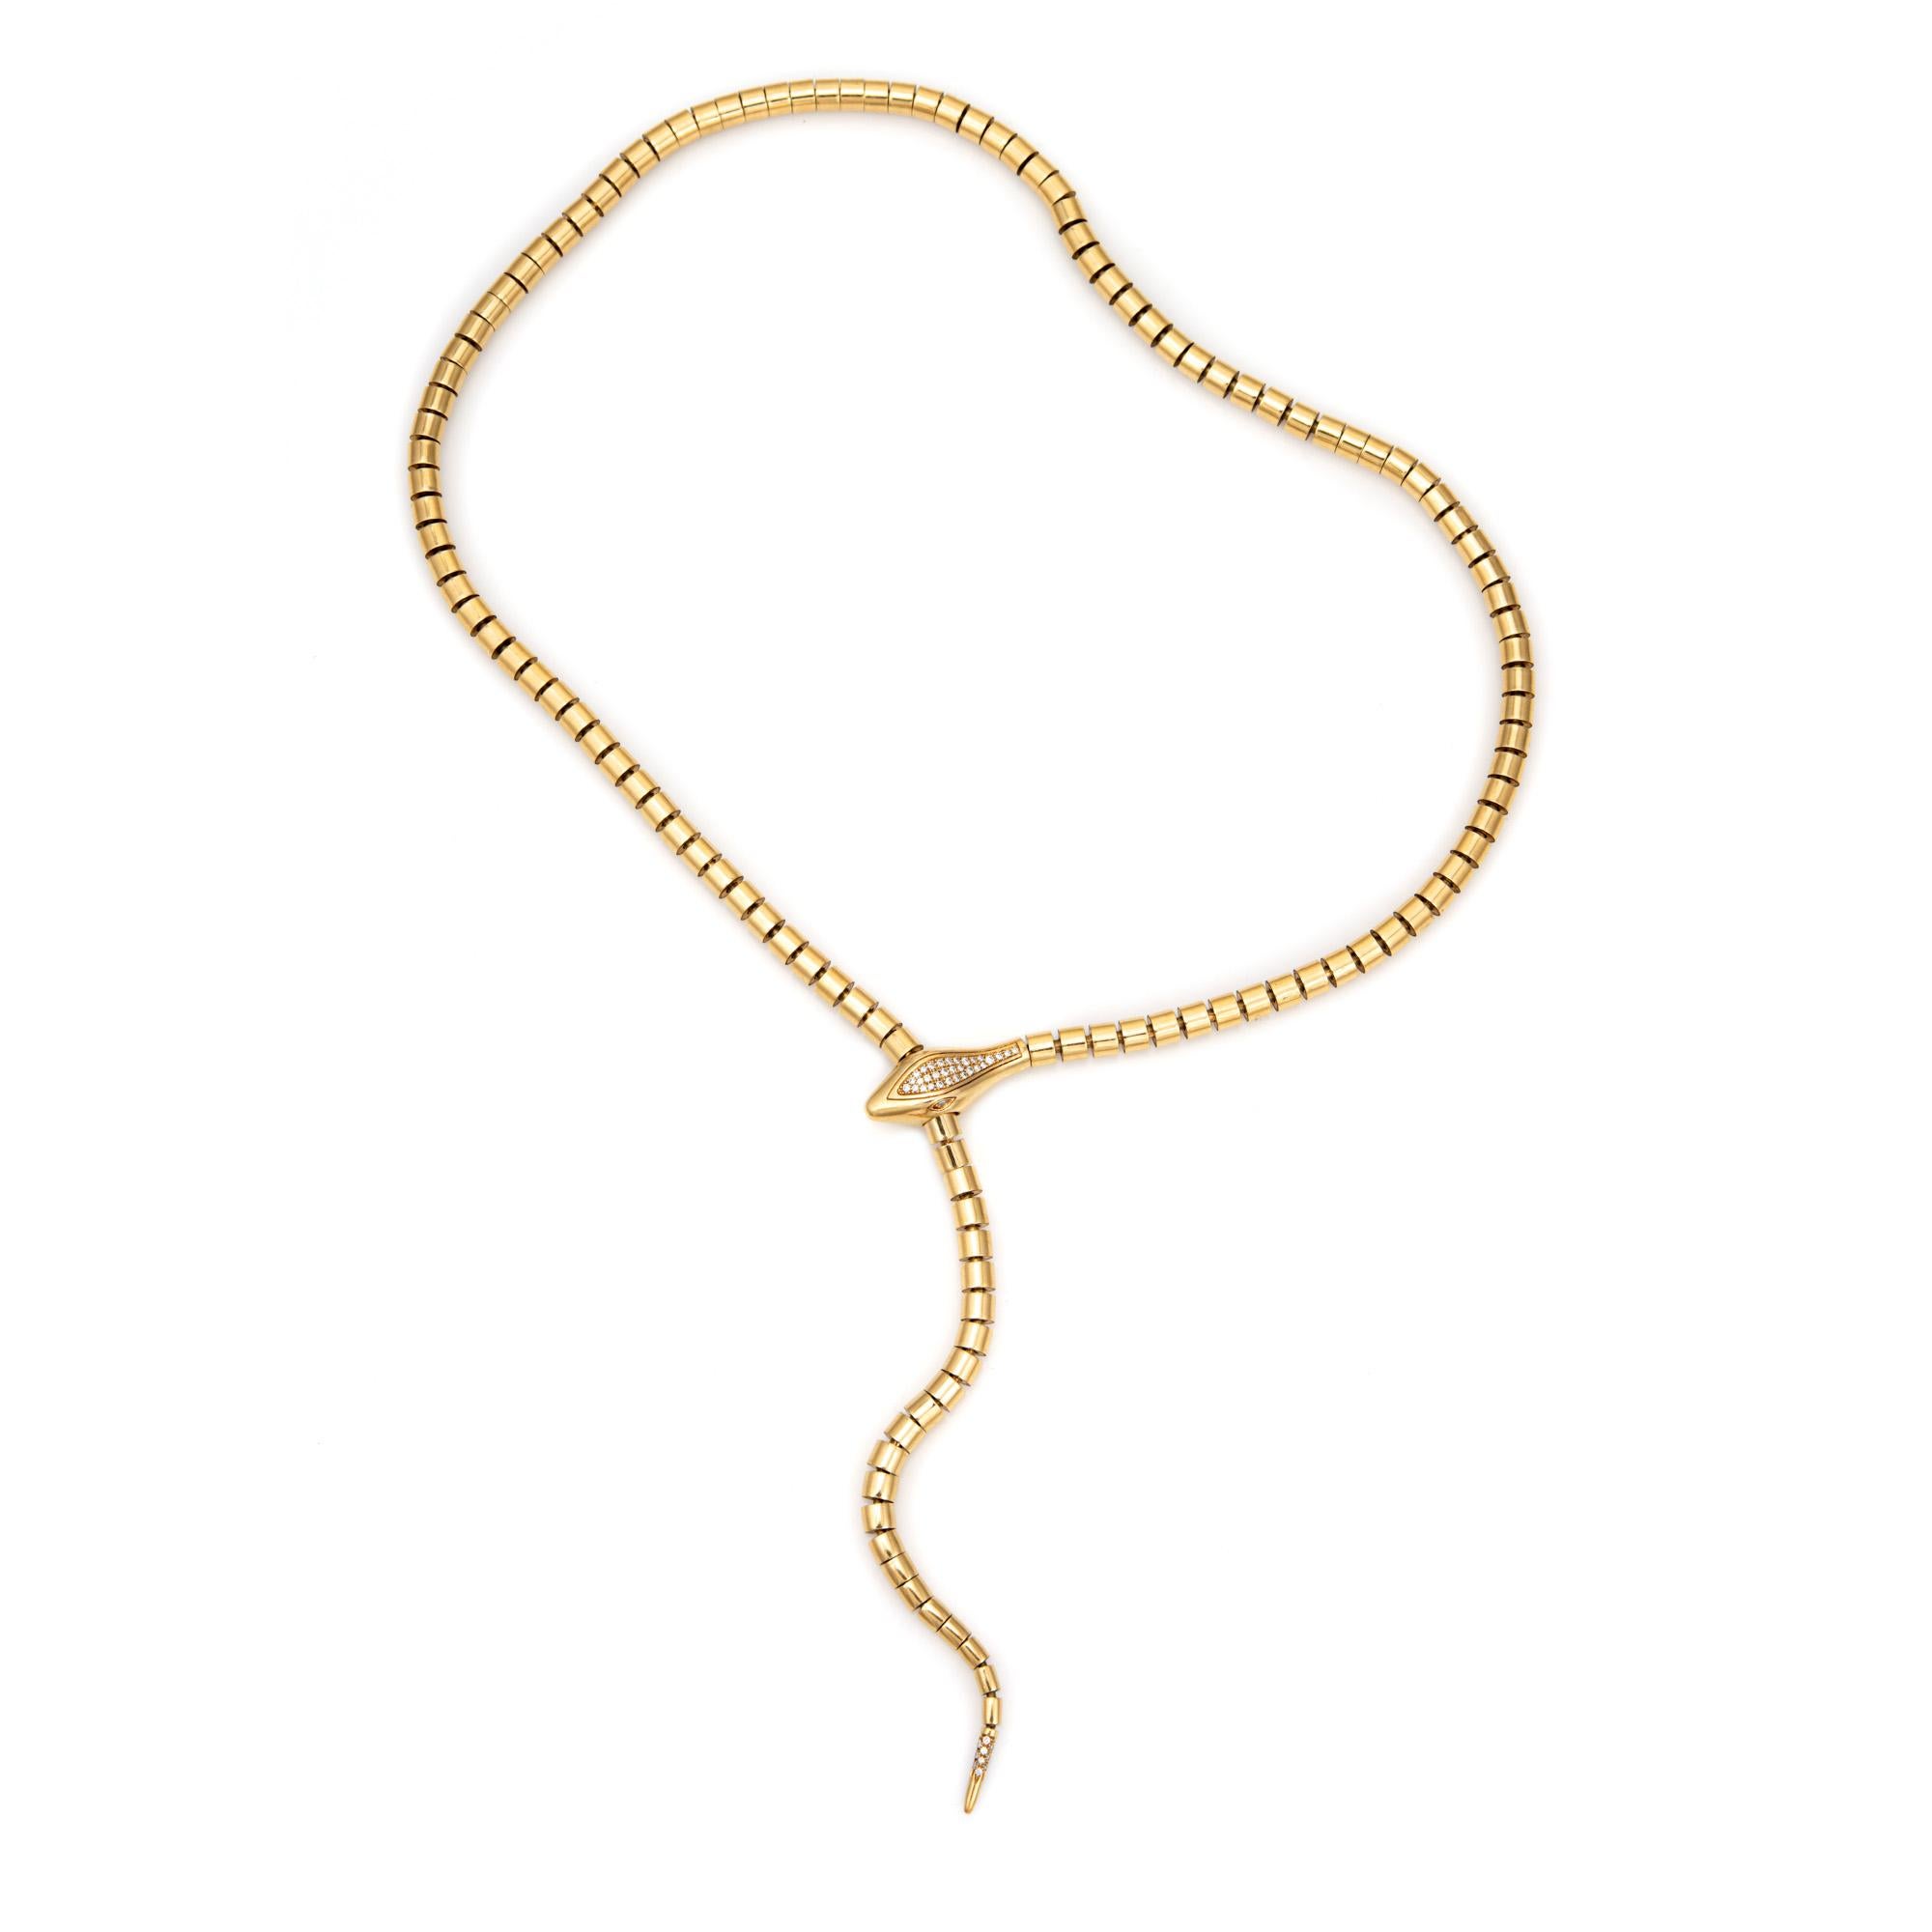 Stylish pre-owned Sidney Garber wrap around snake necklace, crafted in 18 karat yellow gold.  

Pave set diamonds total an estimated 0.34 carats (estimated at H-I color and VS2-SI1 clarity). 

The wrap around lariat necklace is a versatile piece